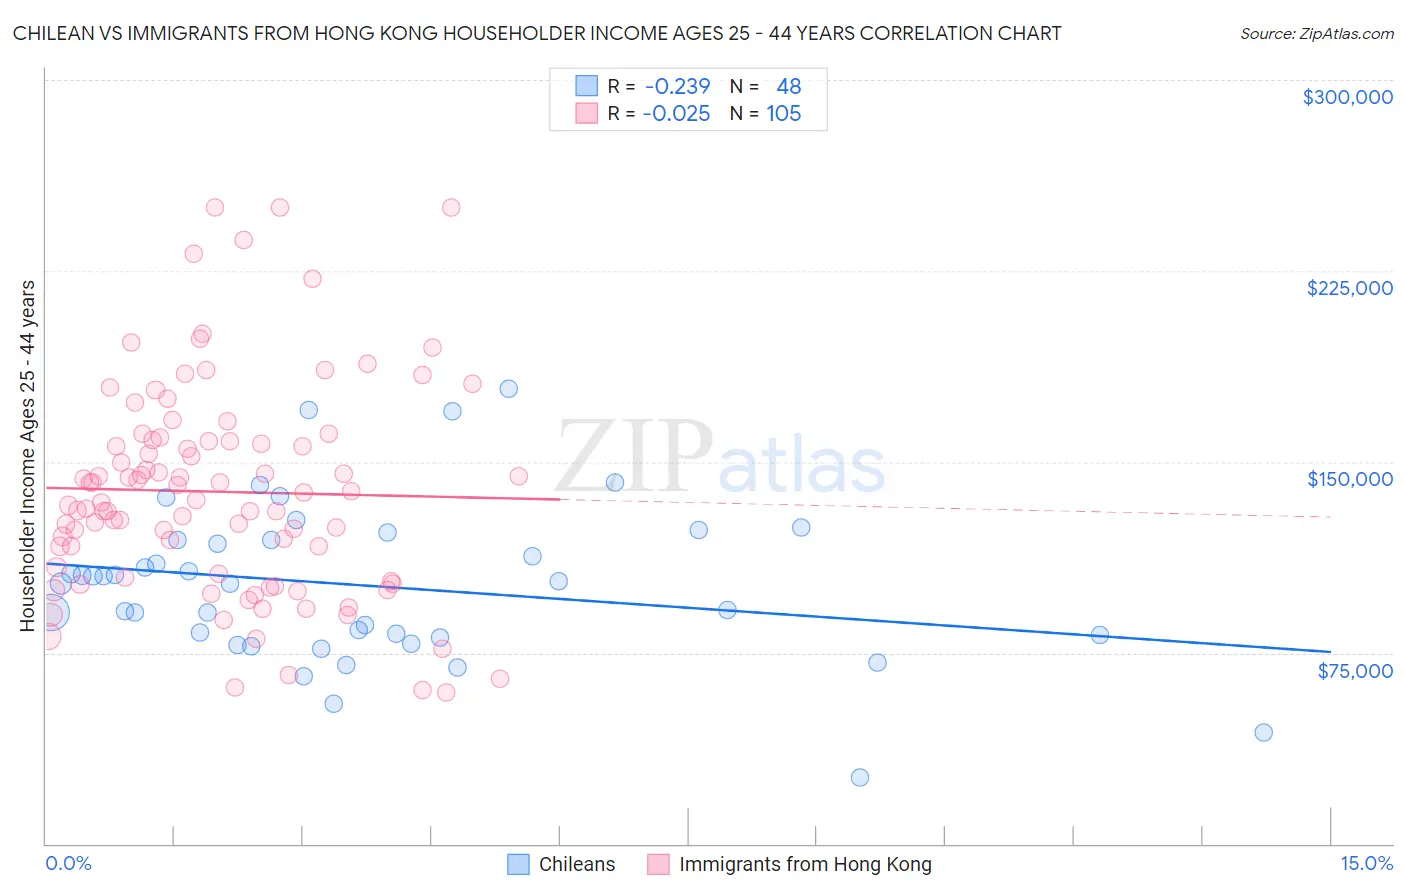 Chilean vs Immigrants from Hong Kong Householder Income Ages 25 - 44 years